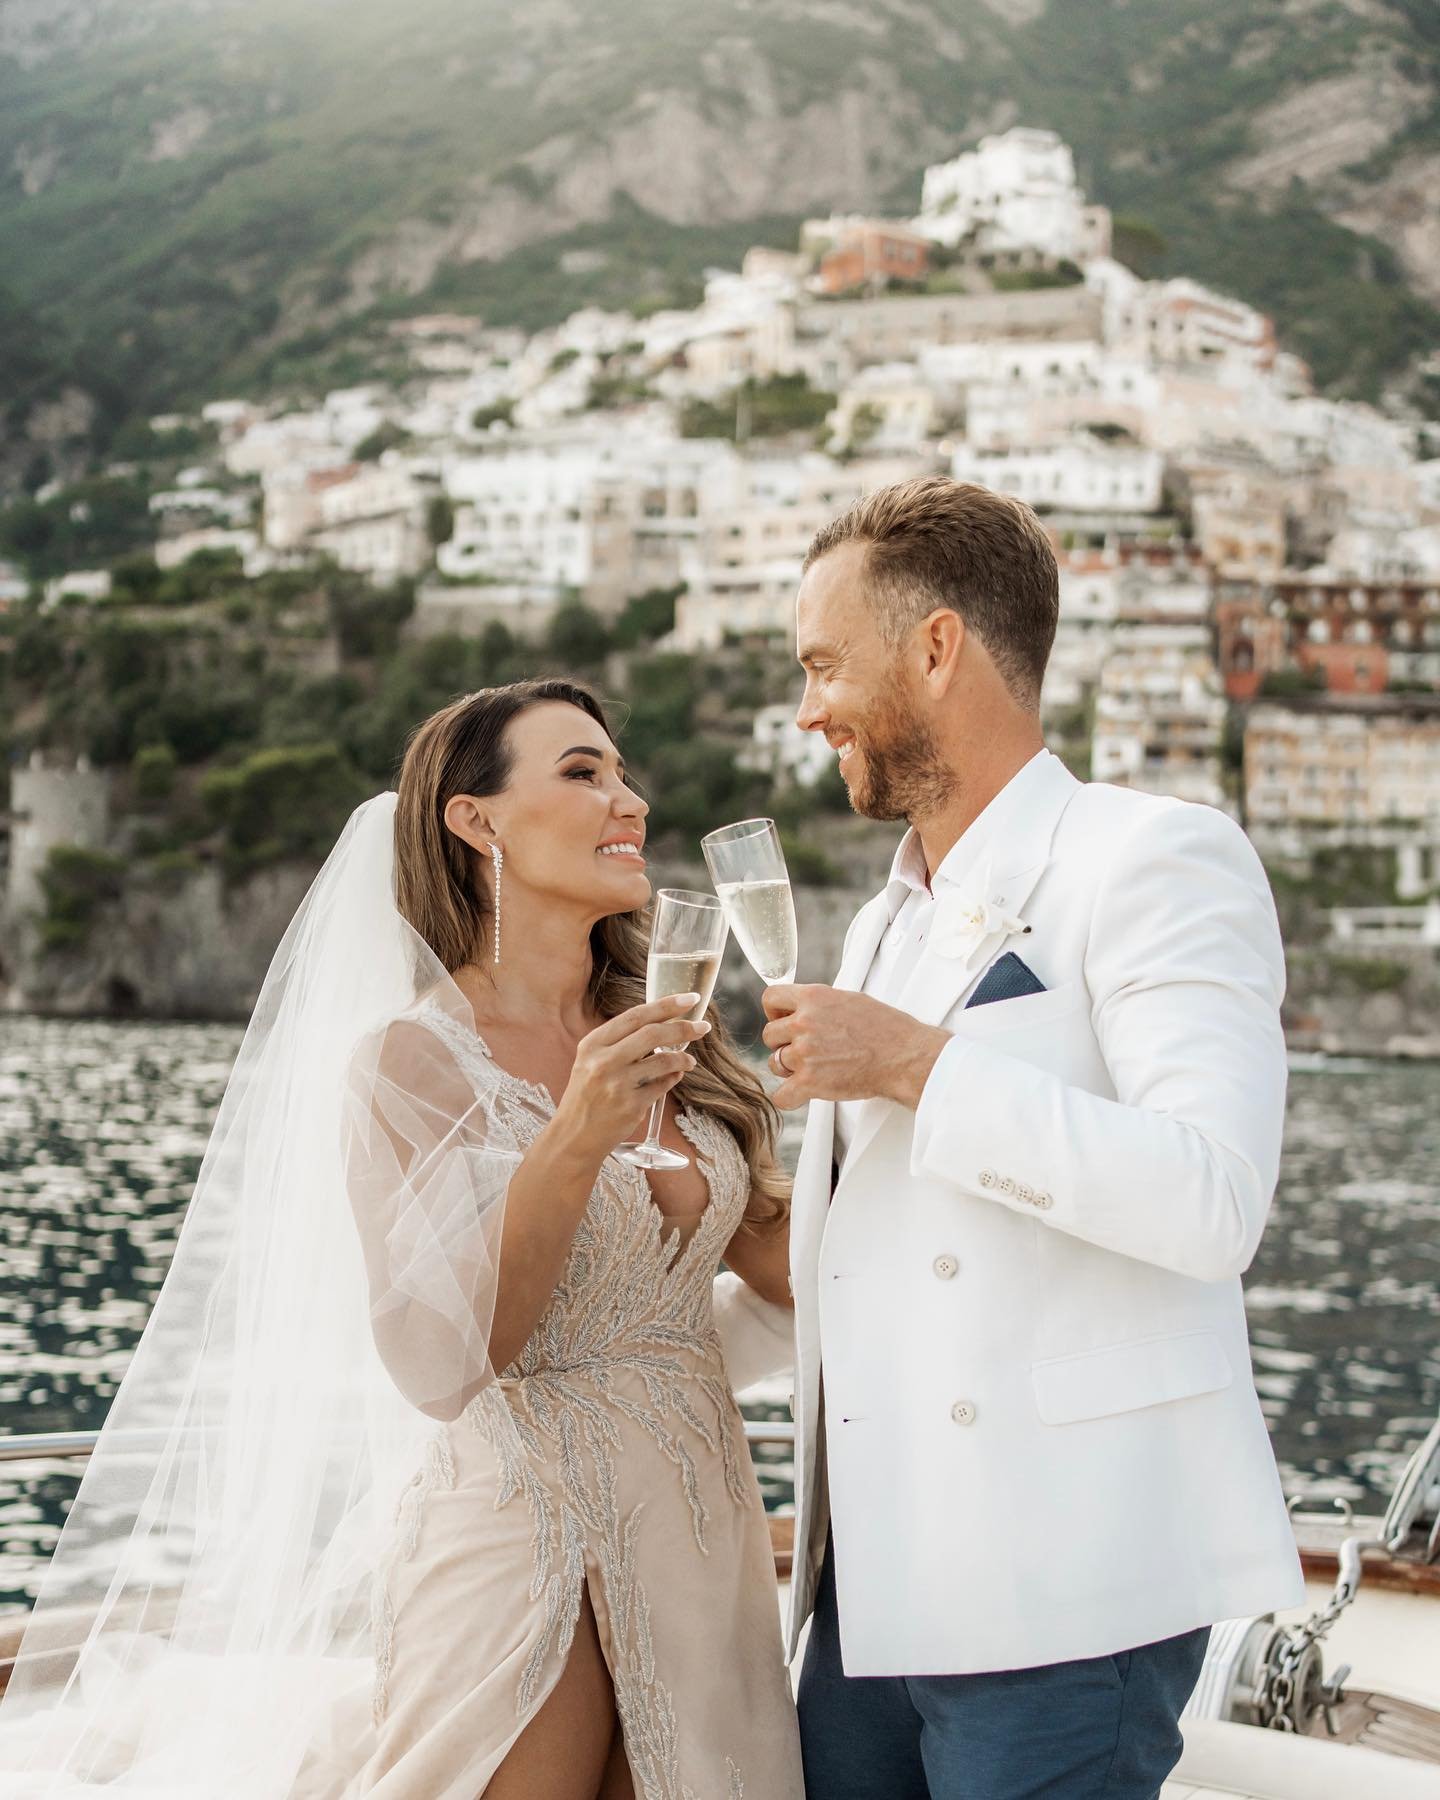 This week I will be heading to Amalfi coast and was thinking about last time I was there last season with this amazing couple. Follow my adventures to discover beautiful spots and yummy Italian food 😋 🍝 🍋 
Makeup @alessandromancinostudios 
Venue @